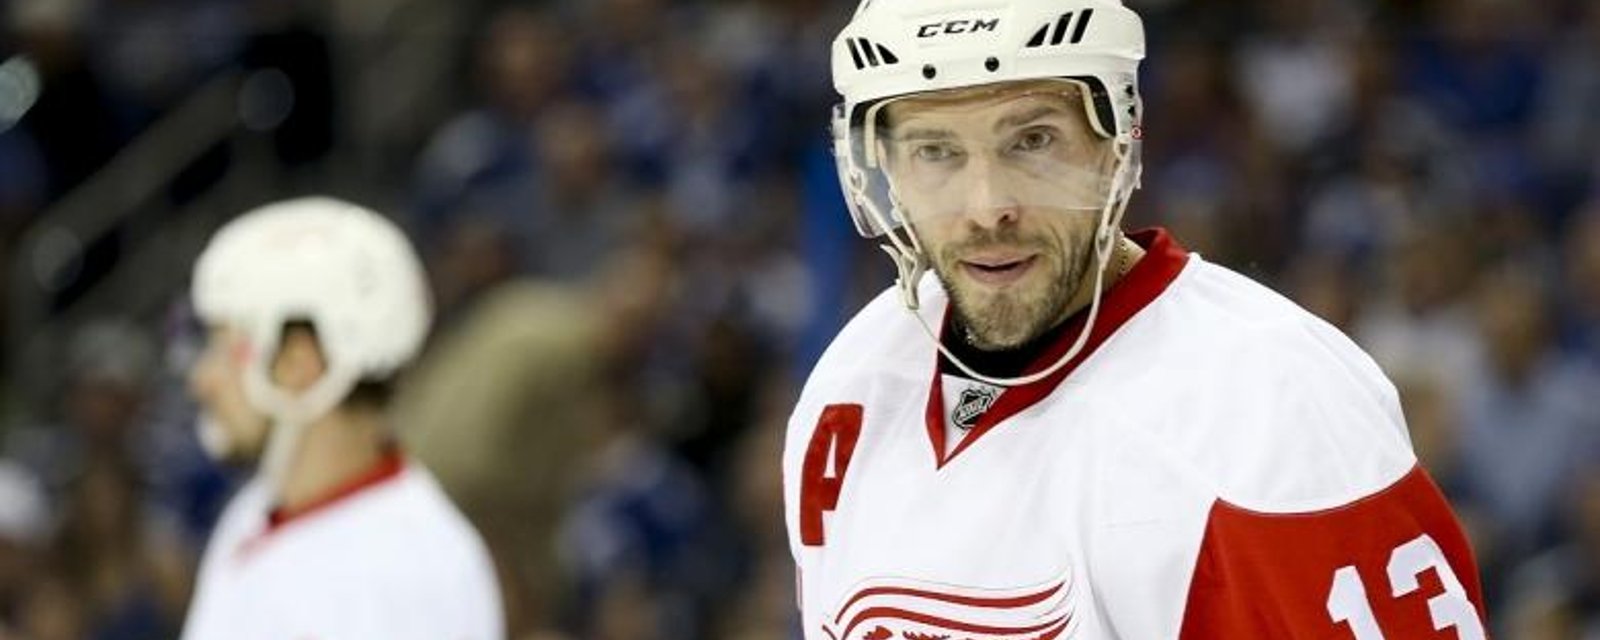 Datsyuk to meet with Holland Friday, and rumblings of an announcement.